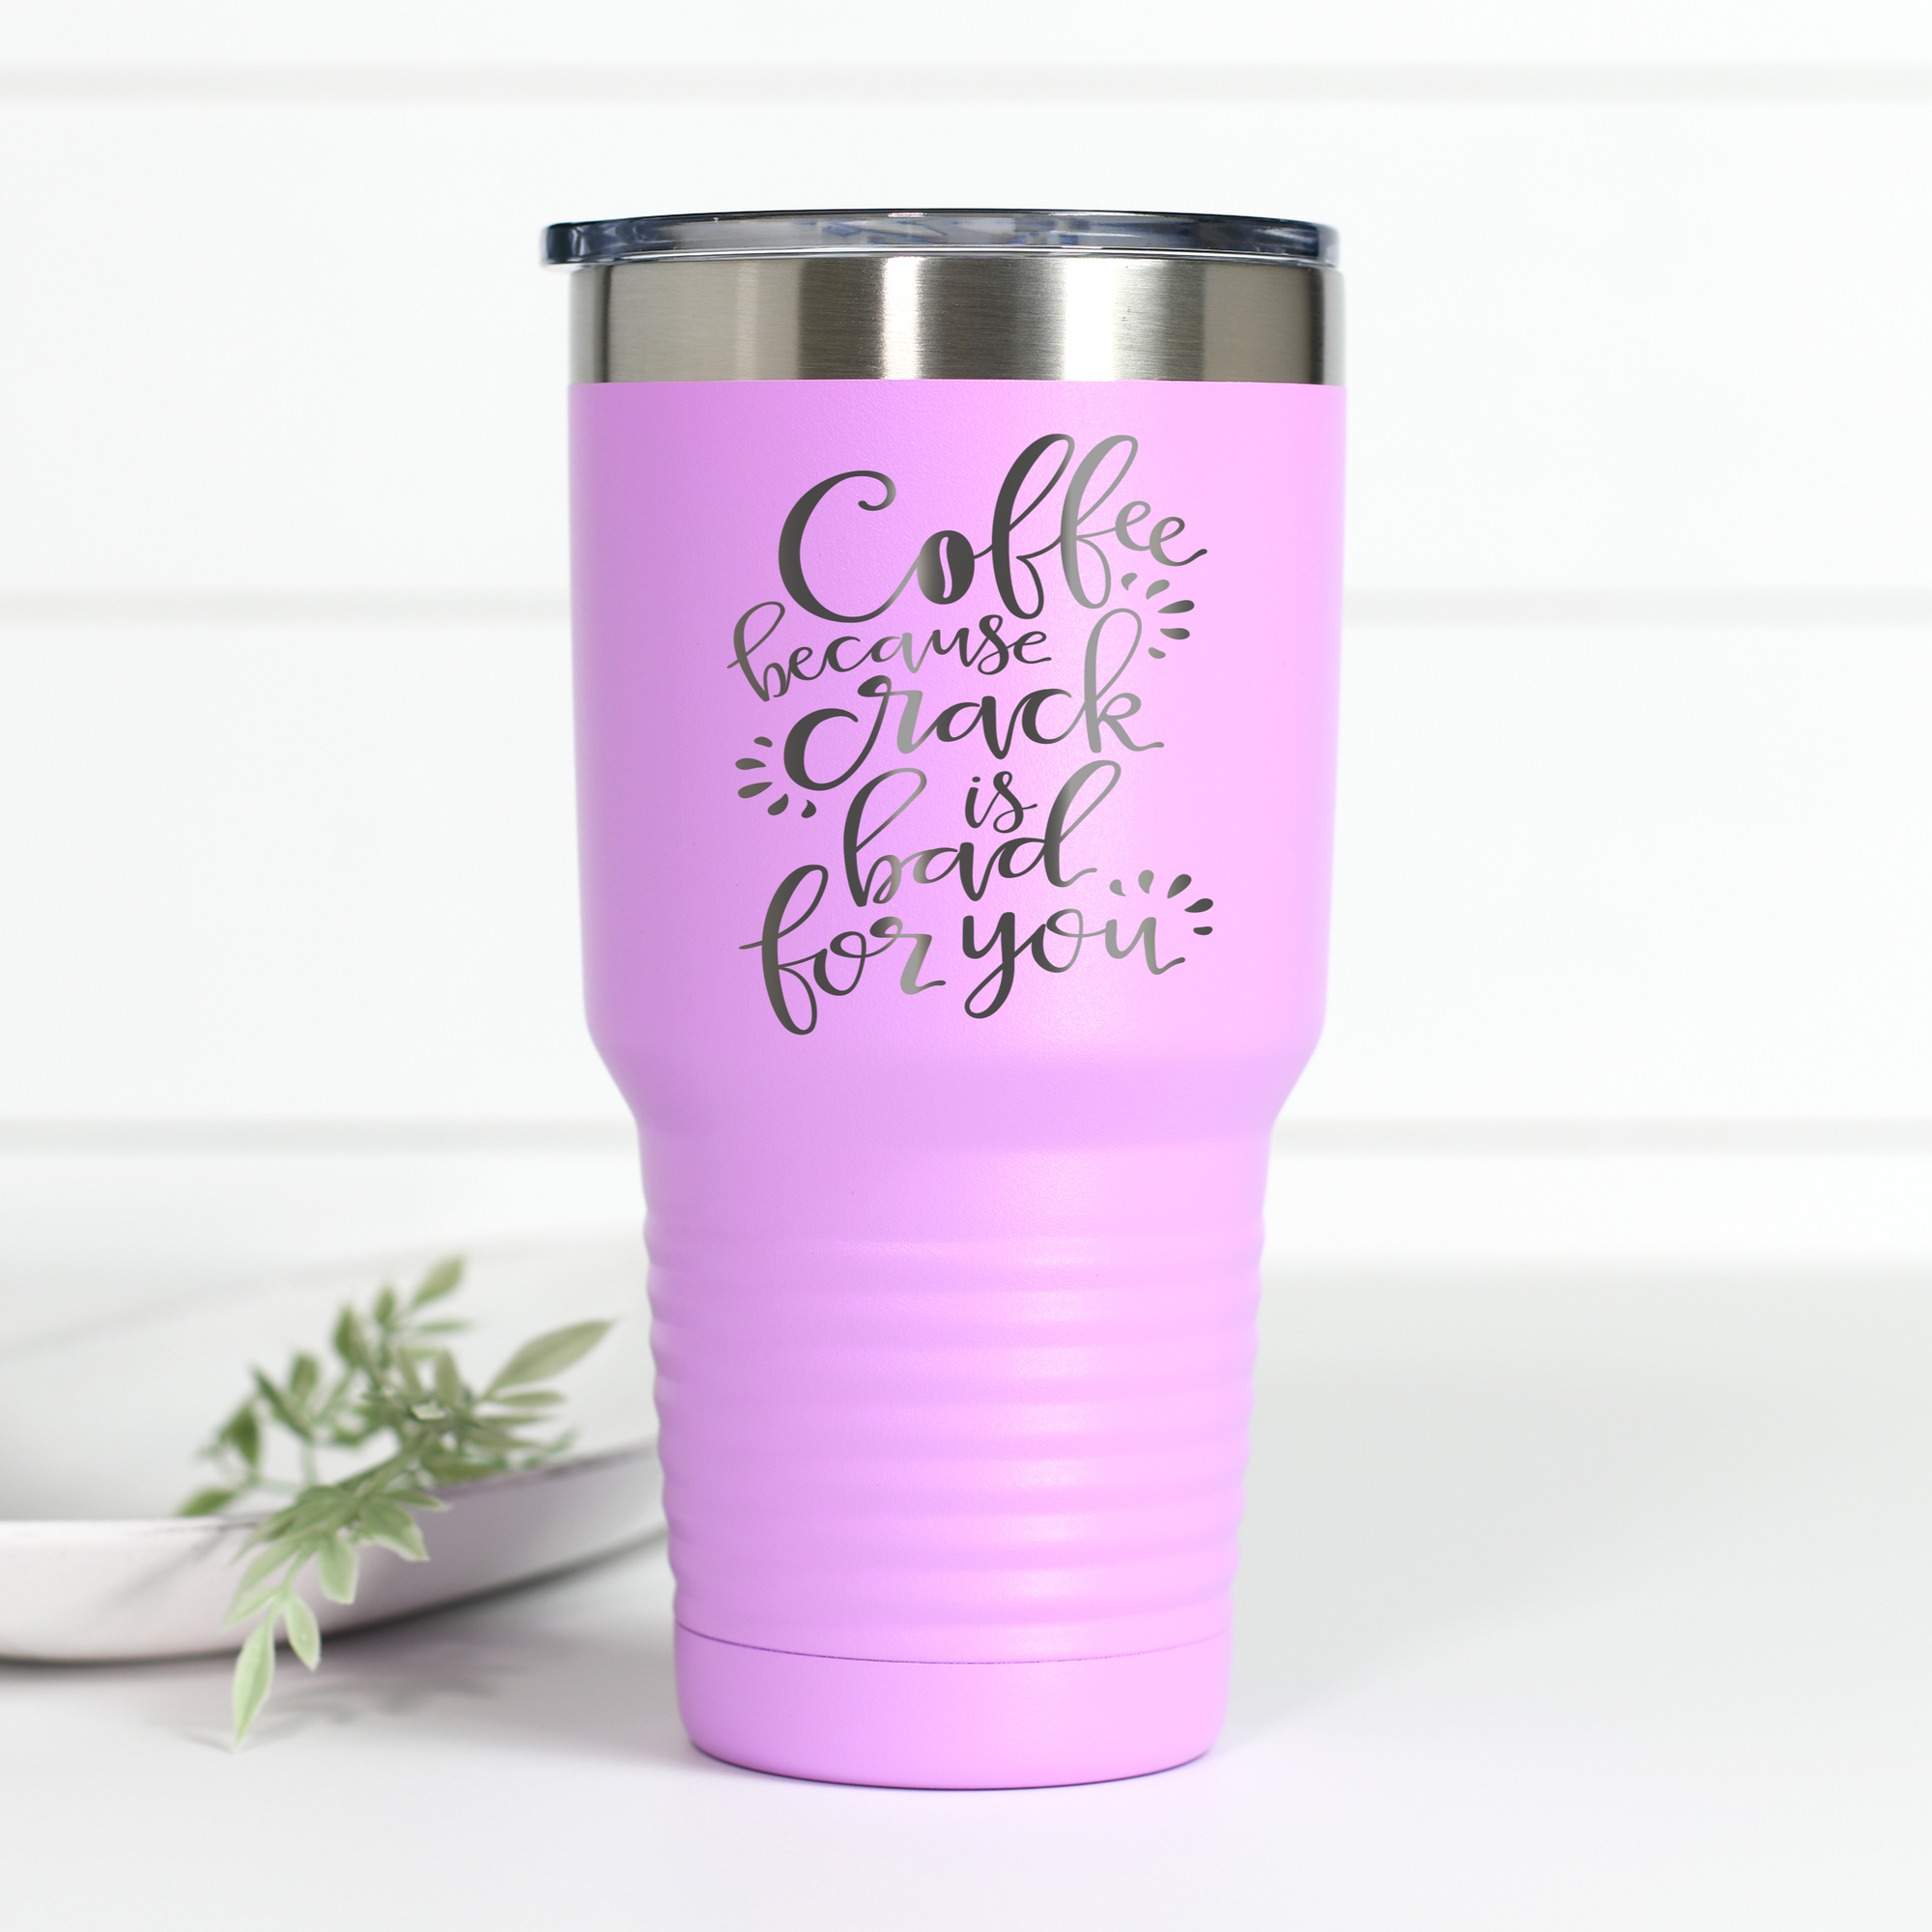 Coffee Because Crack Is Bad For You 30 oz Engraved Tumbler